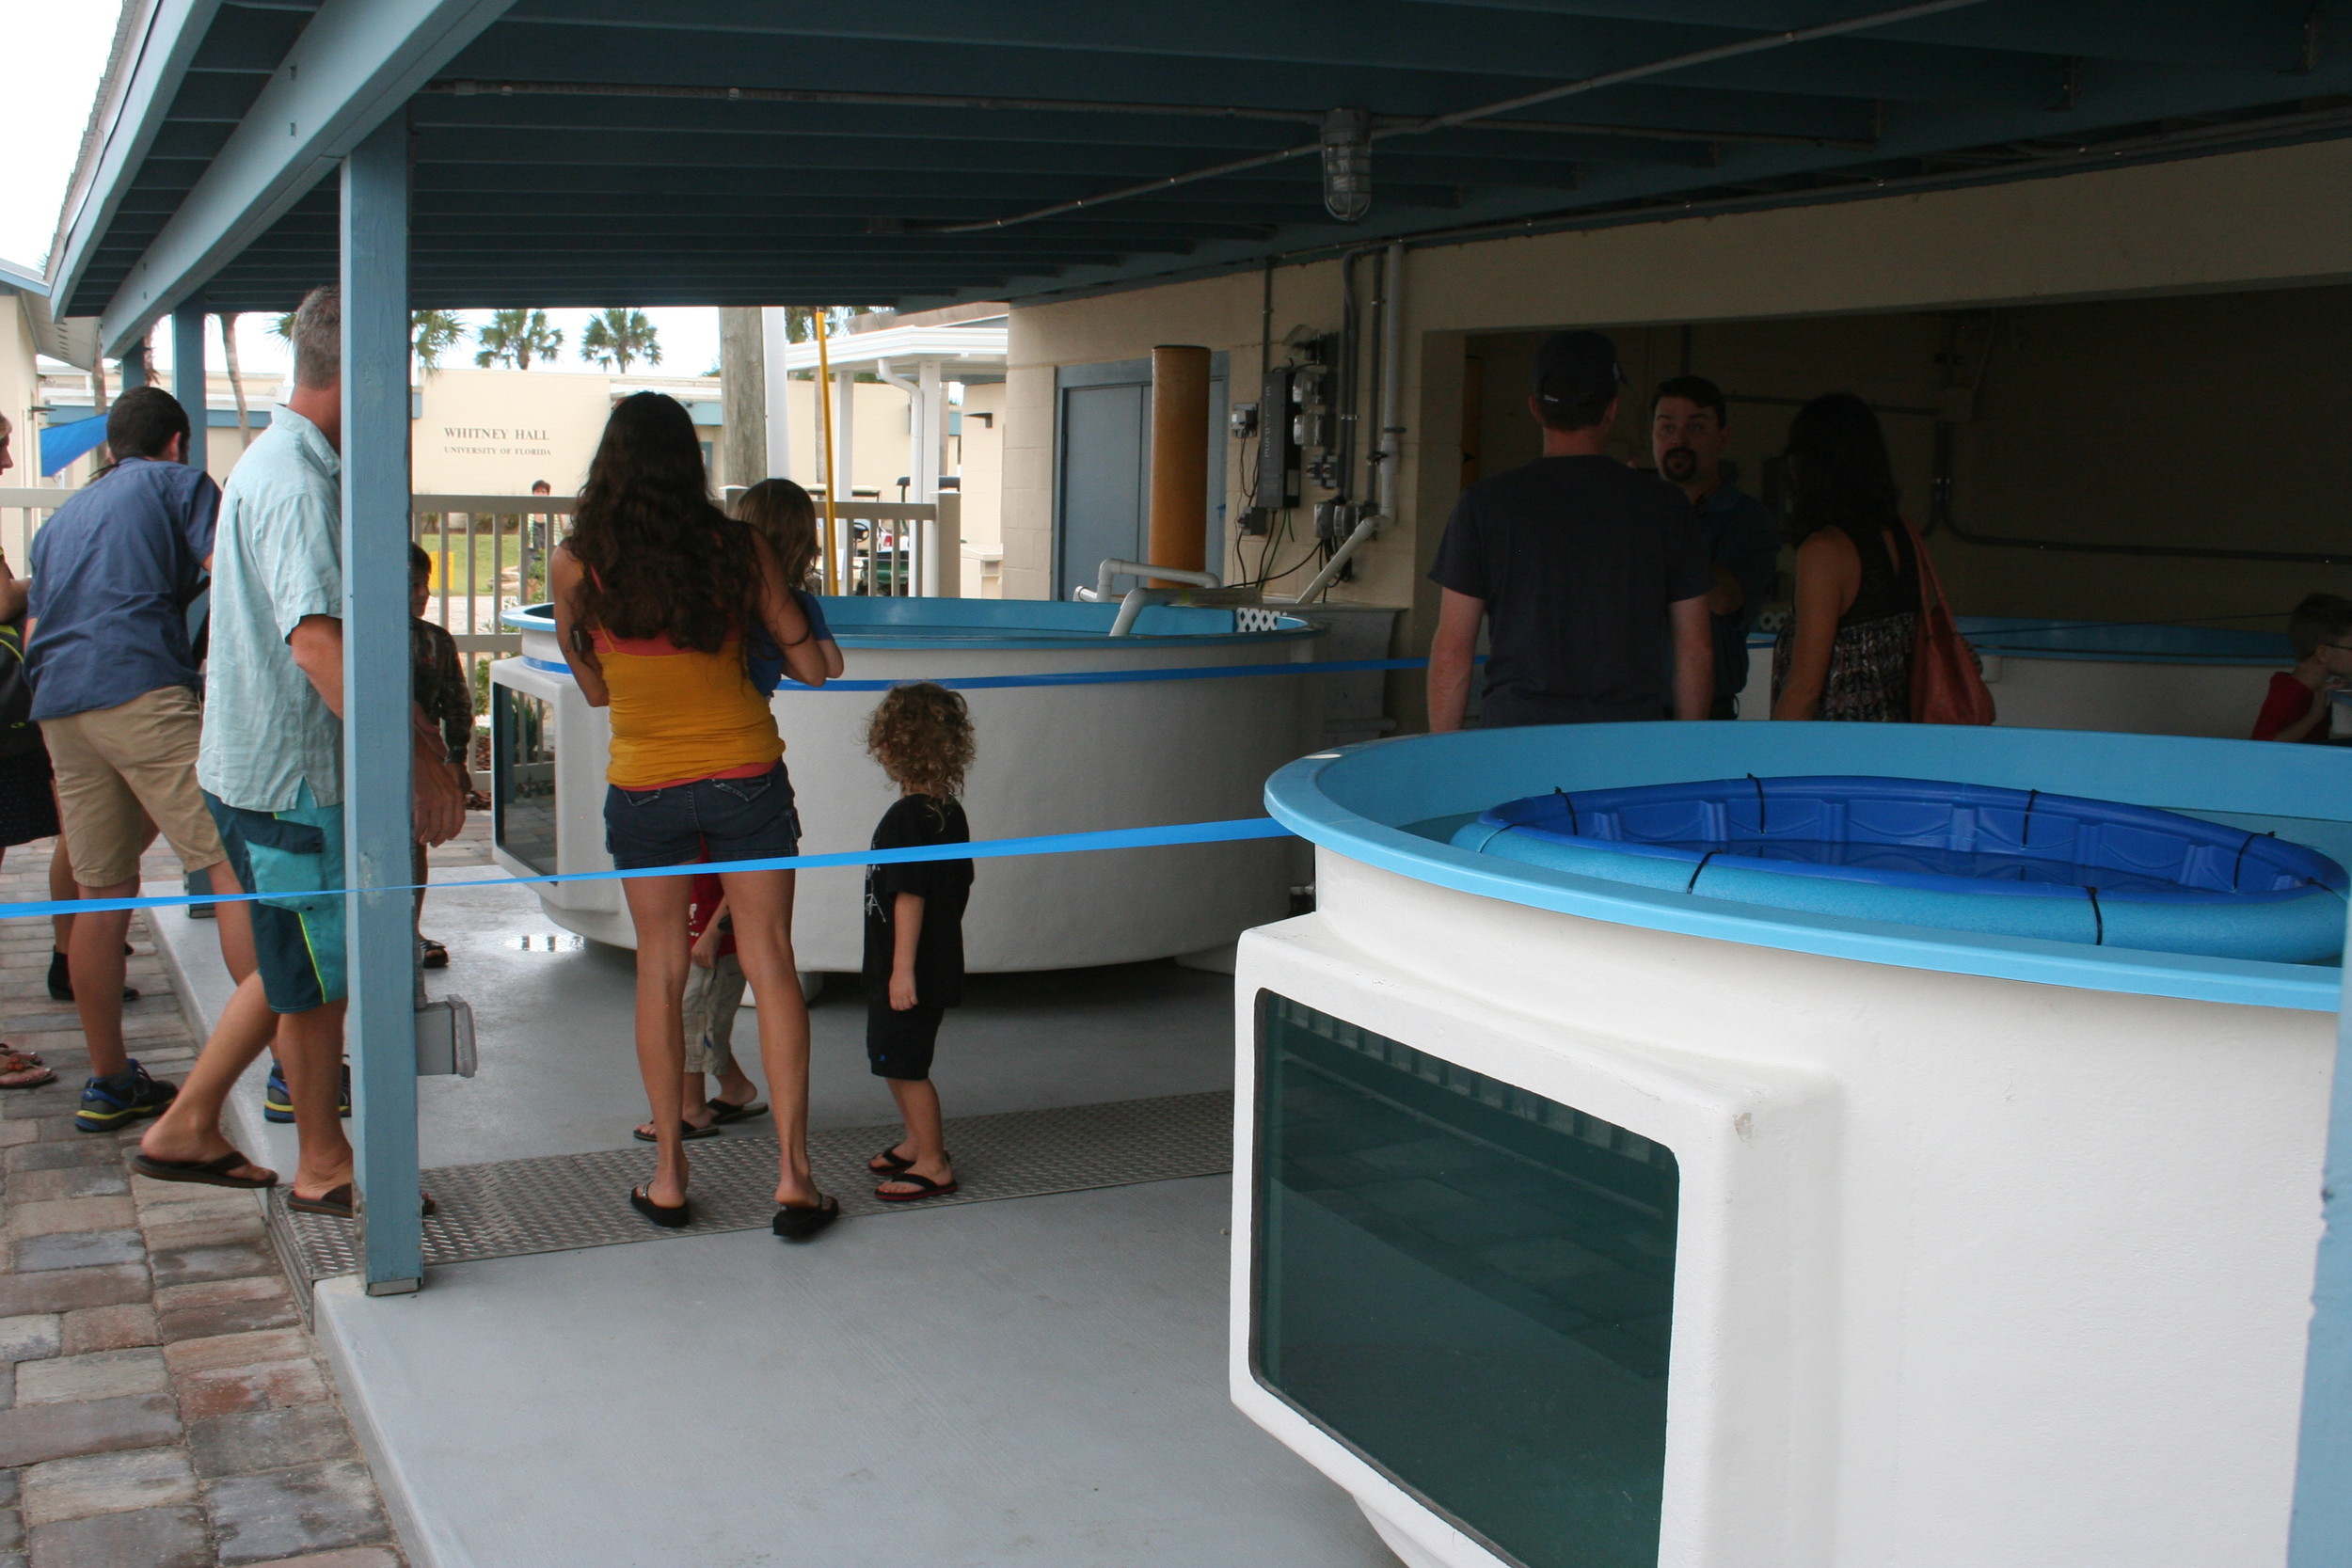 There are four 1,100 gallon tanks that can hold up to four turtles each located at the hospital. Each tank has its own filtration system and the capability of using the center’s sea water system or it can be self-contained for quarantined sea turtles.